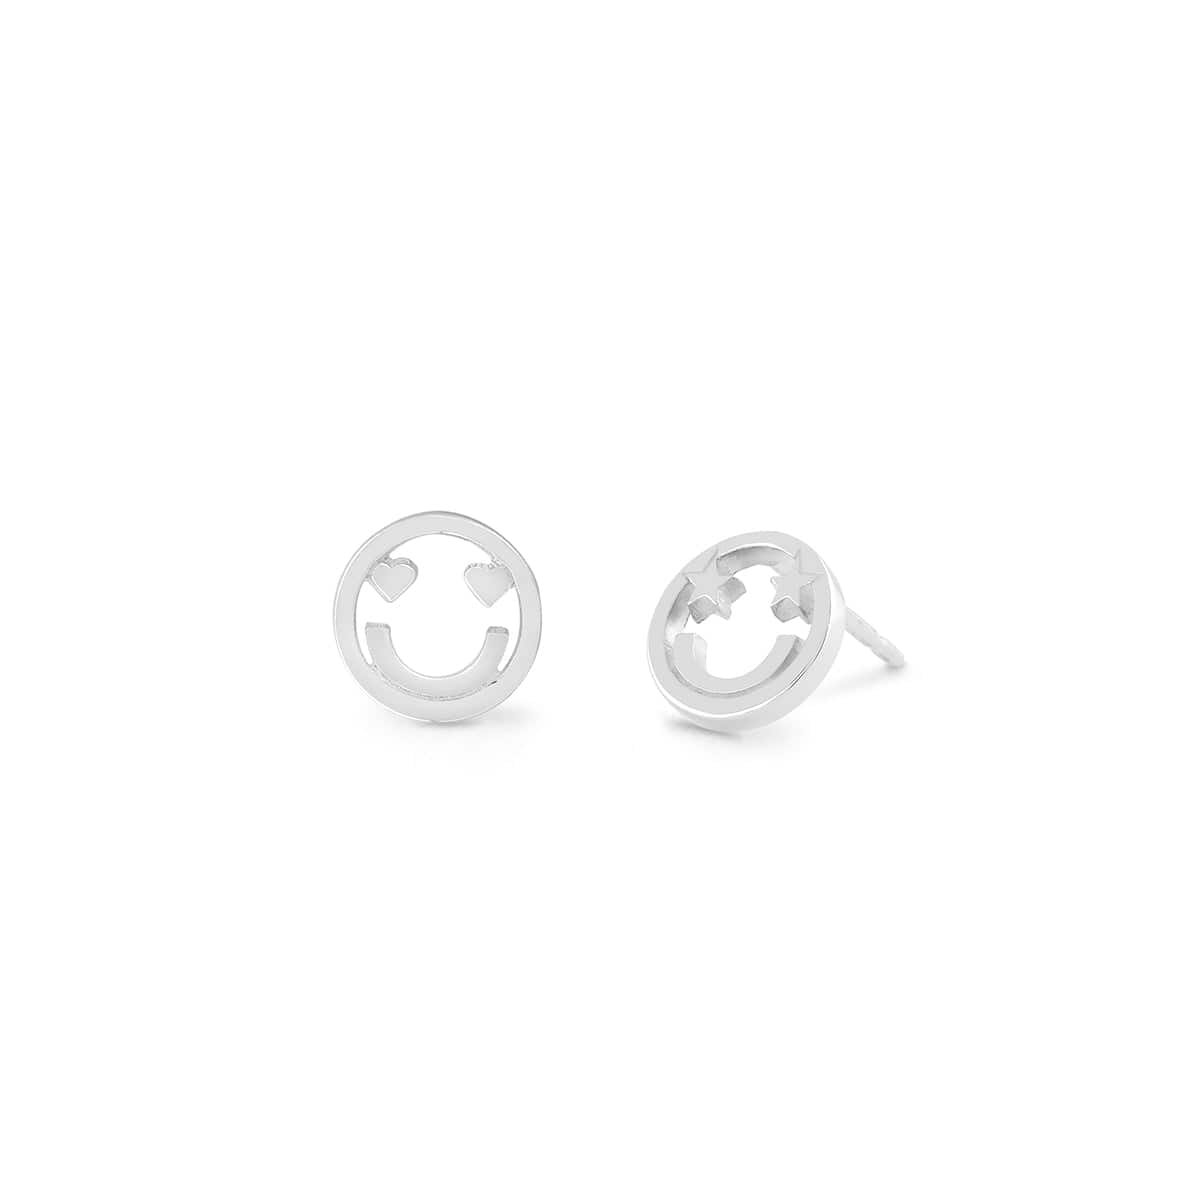 Boma Jewelry Earrings Happy Face Studs